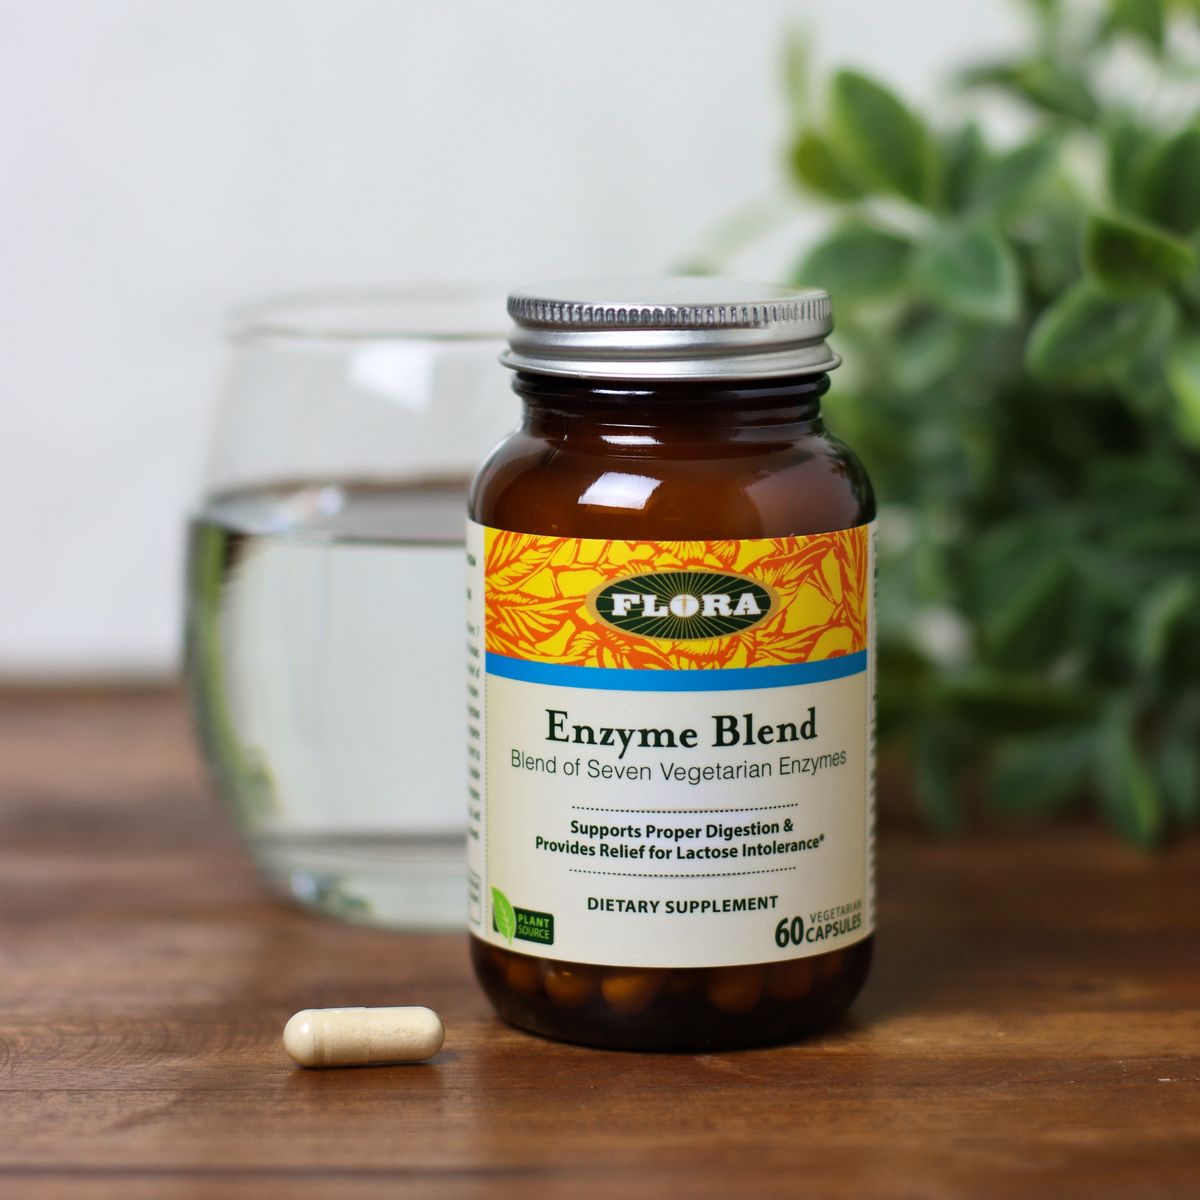 A bottle and capsule of Enzyme Blend from Flora